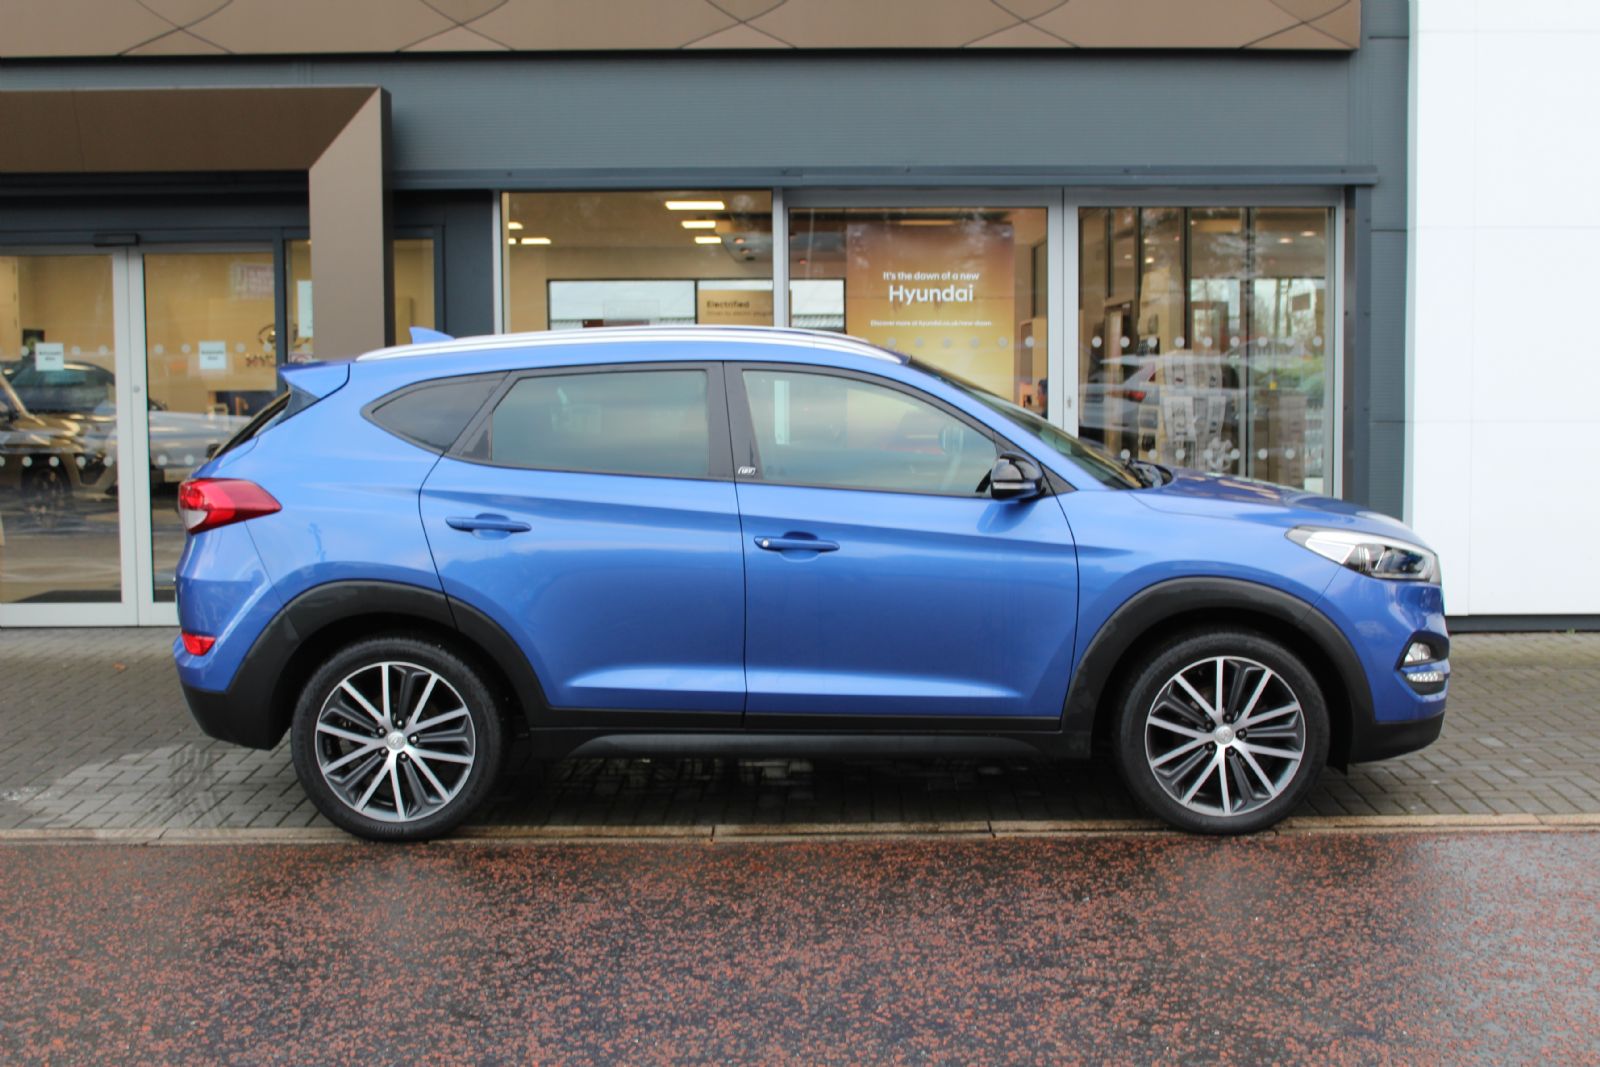 Hyundai TUCSON GO SE 2WD T-GDI for sale Randalstown. Used car dealer ...